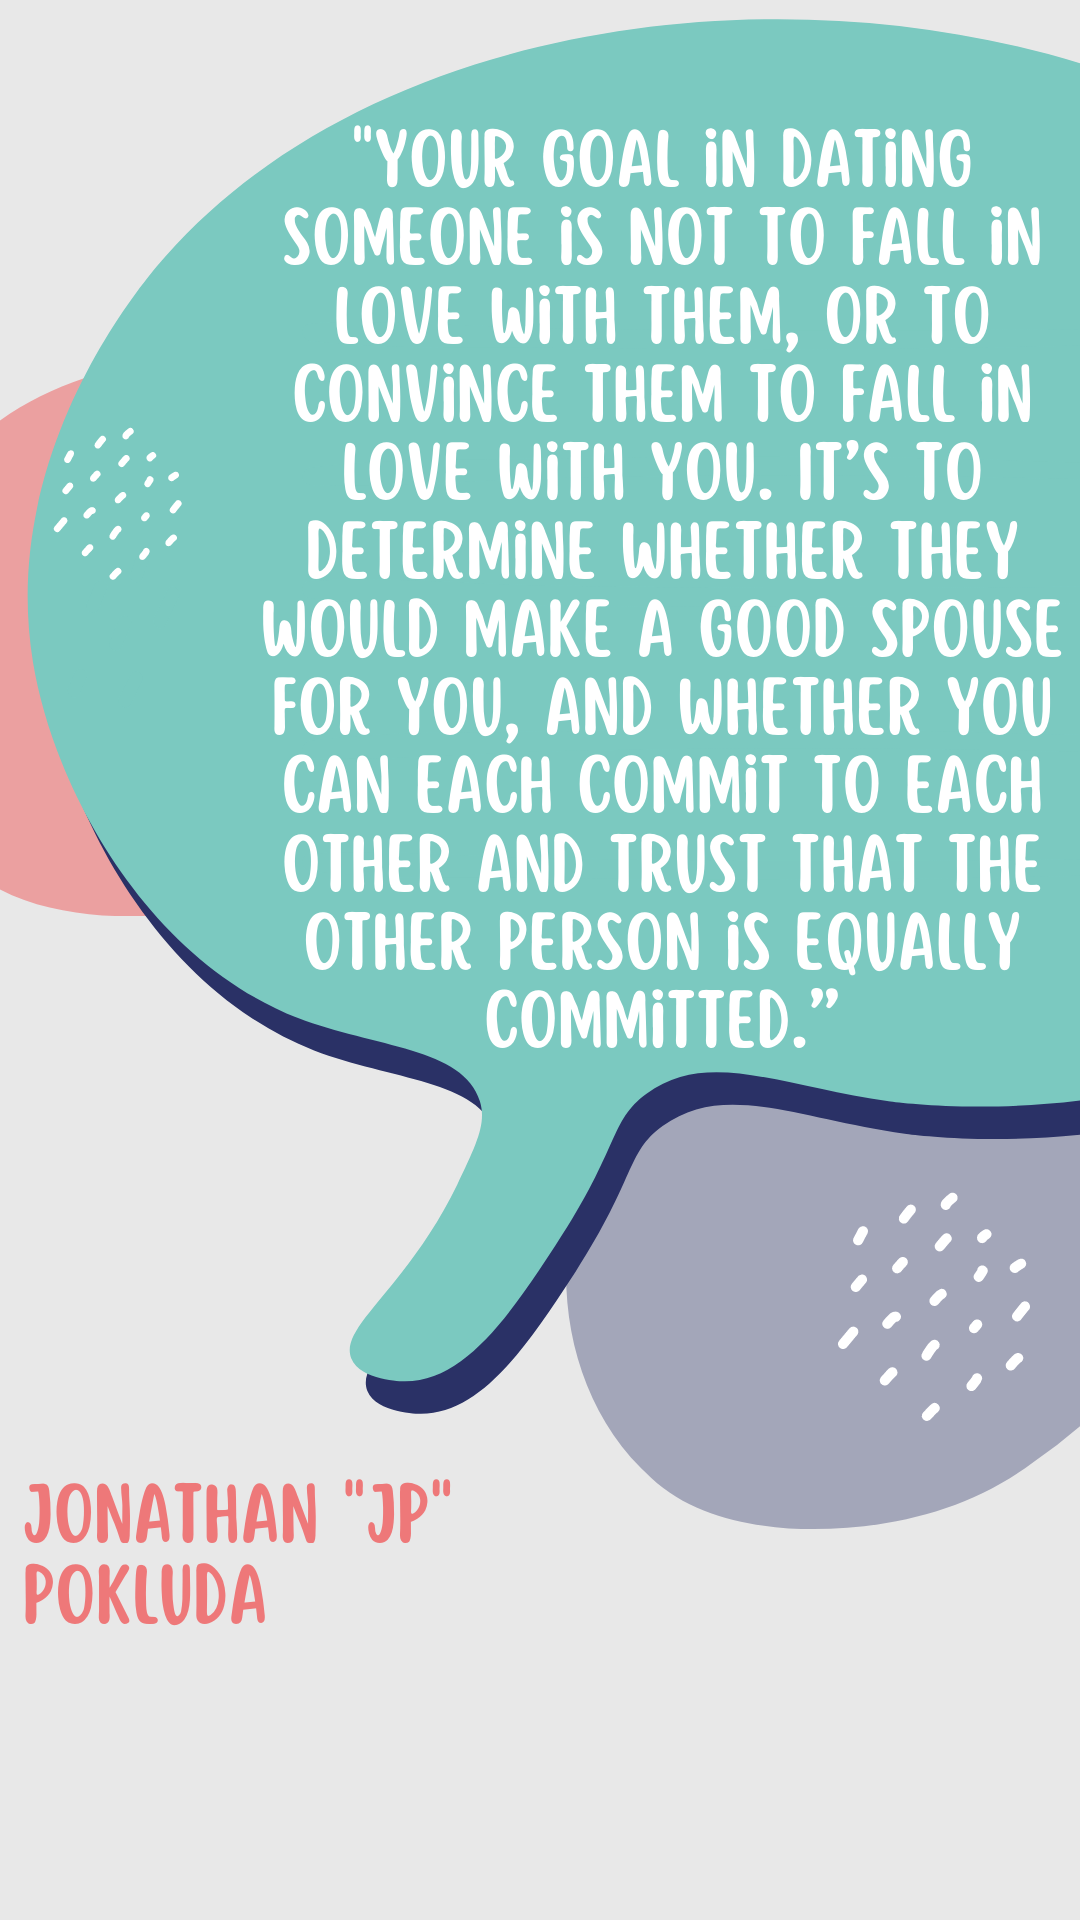 “ Your goal in dating someone is not to “fall in love” with them, or to convince them to fall in love with you. It’s to determine whether they would make a good spouse for you, and whether you can each commit to each other and trust that the other person is equally committed,” said JP Pokluda.